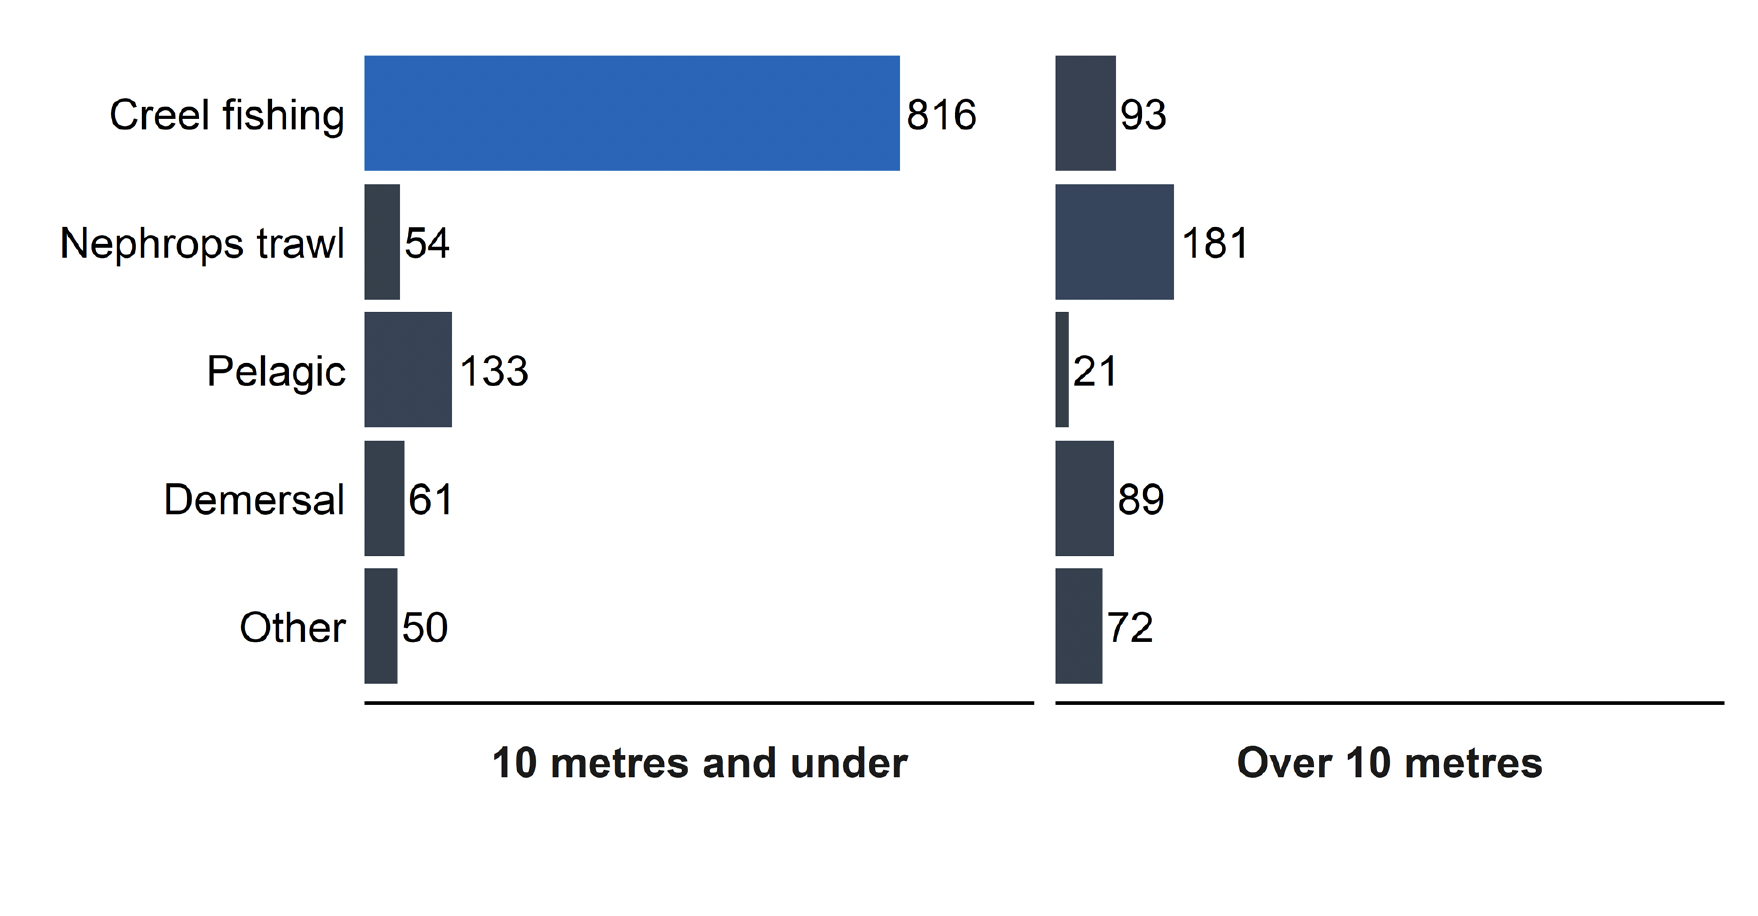 A bar chart showing the number of active Scottish fishing vessels by their main fishing method used and length category in 2022. The chart shows that the largest category is 10 metre and under creel fishing vessels with 816 having this main fishing method and length category. 